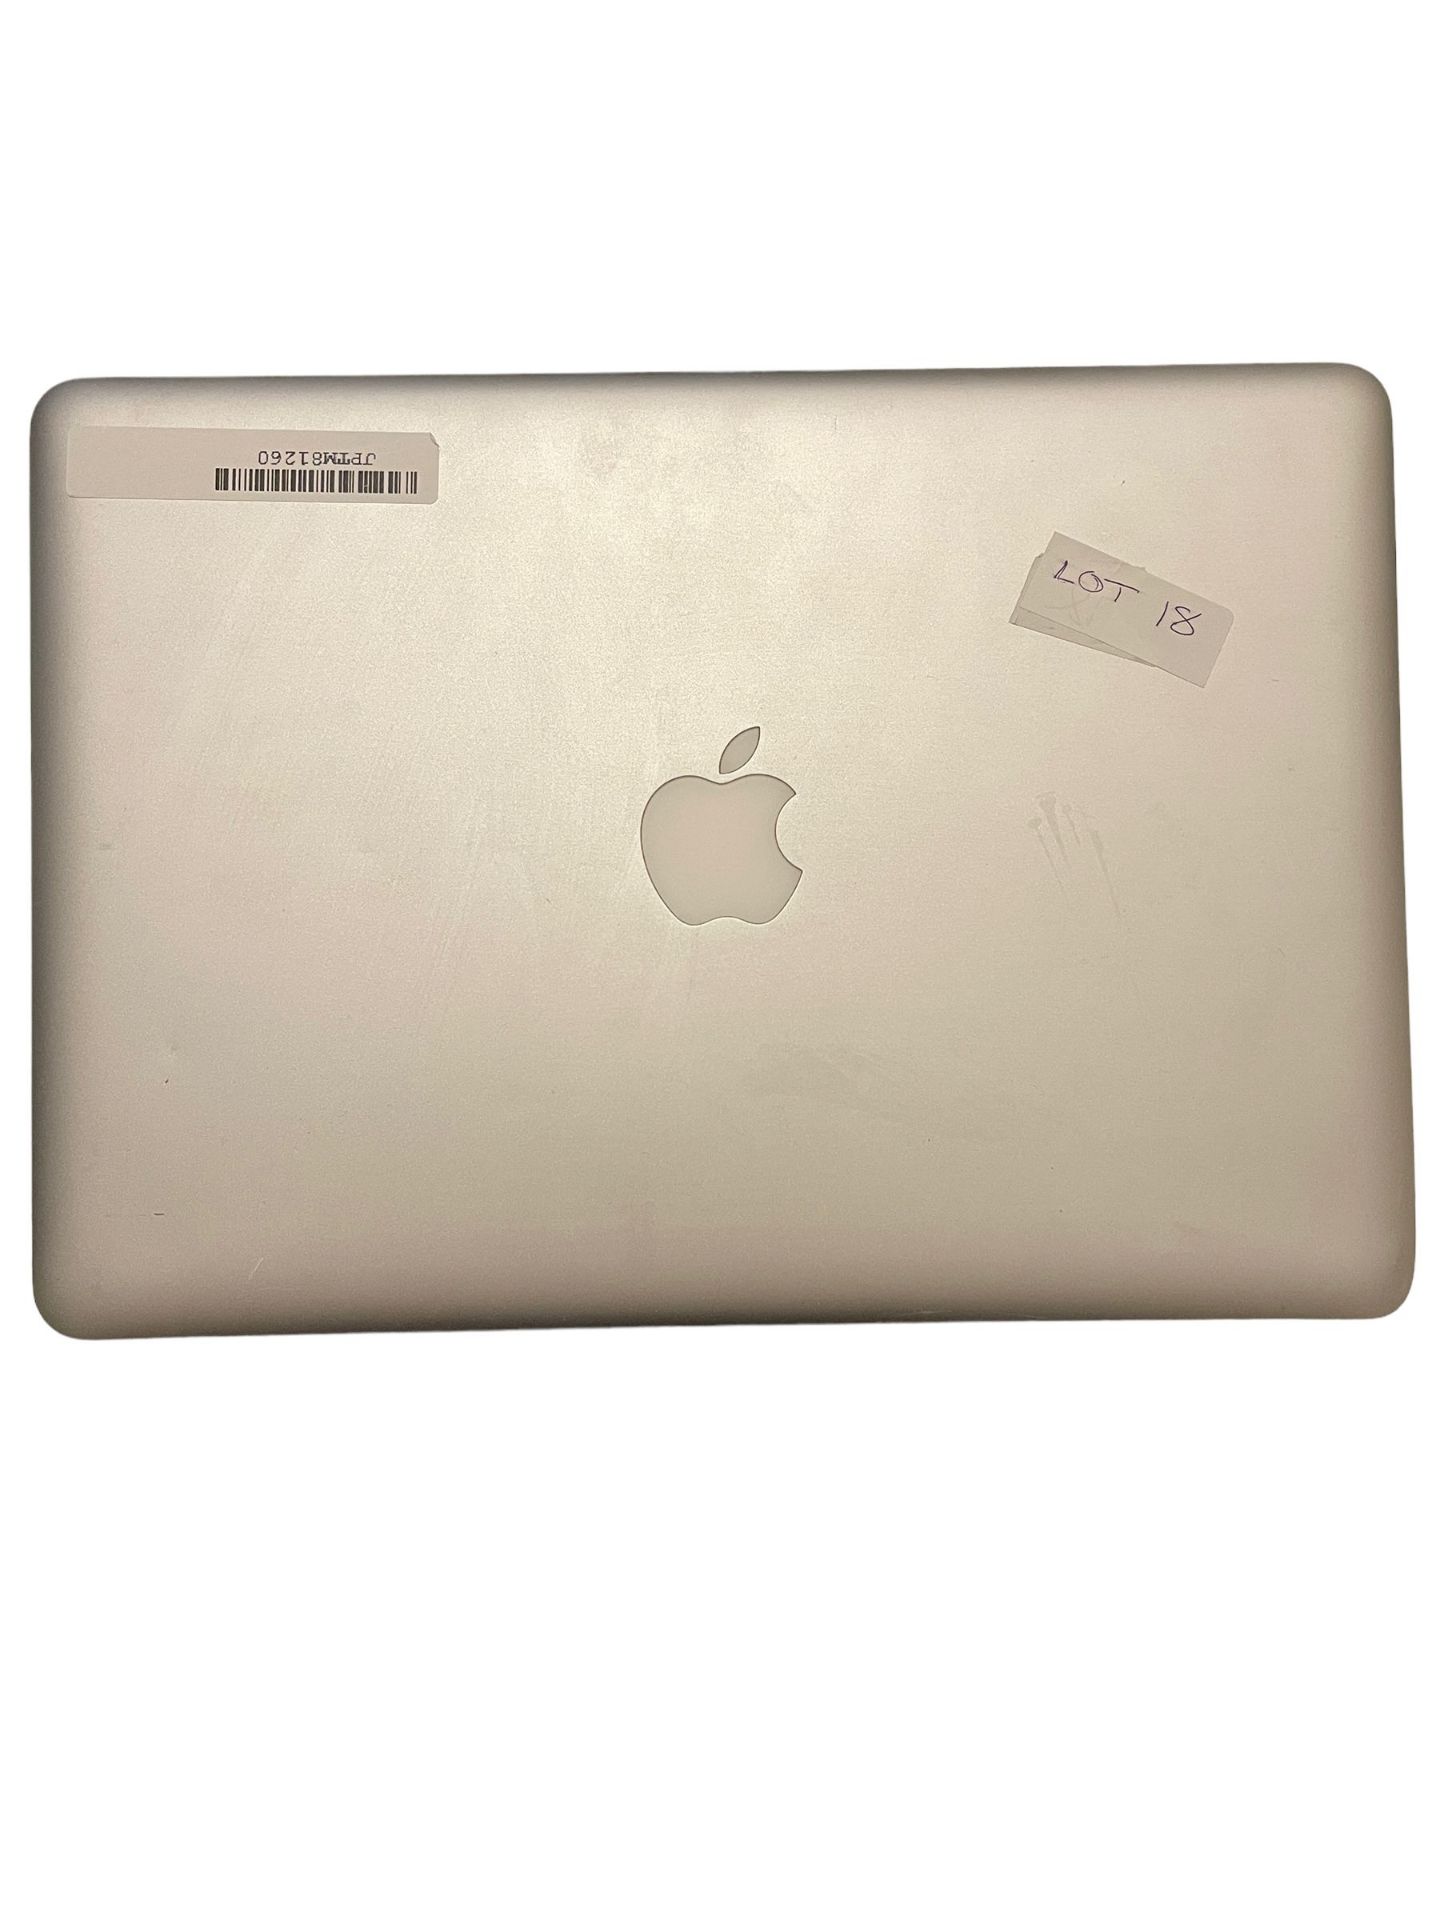 apple lap top computor working drive tacken out under the dater protection act - Image 2 of 2